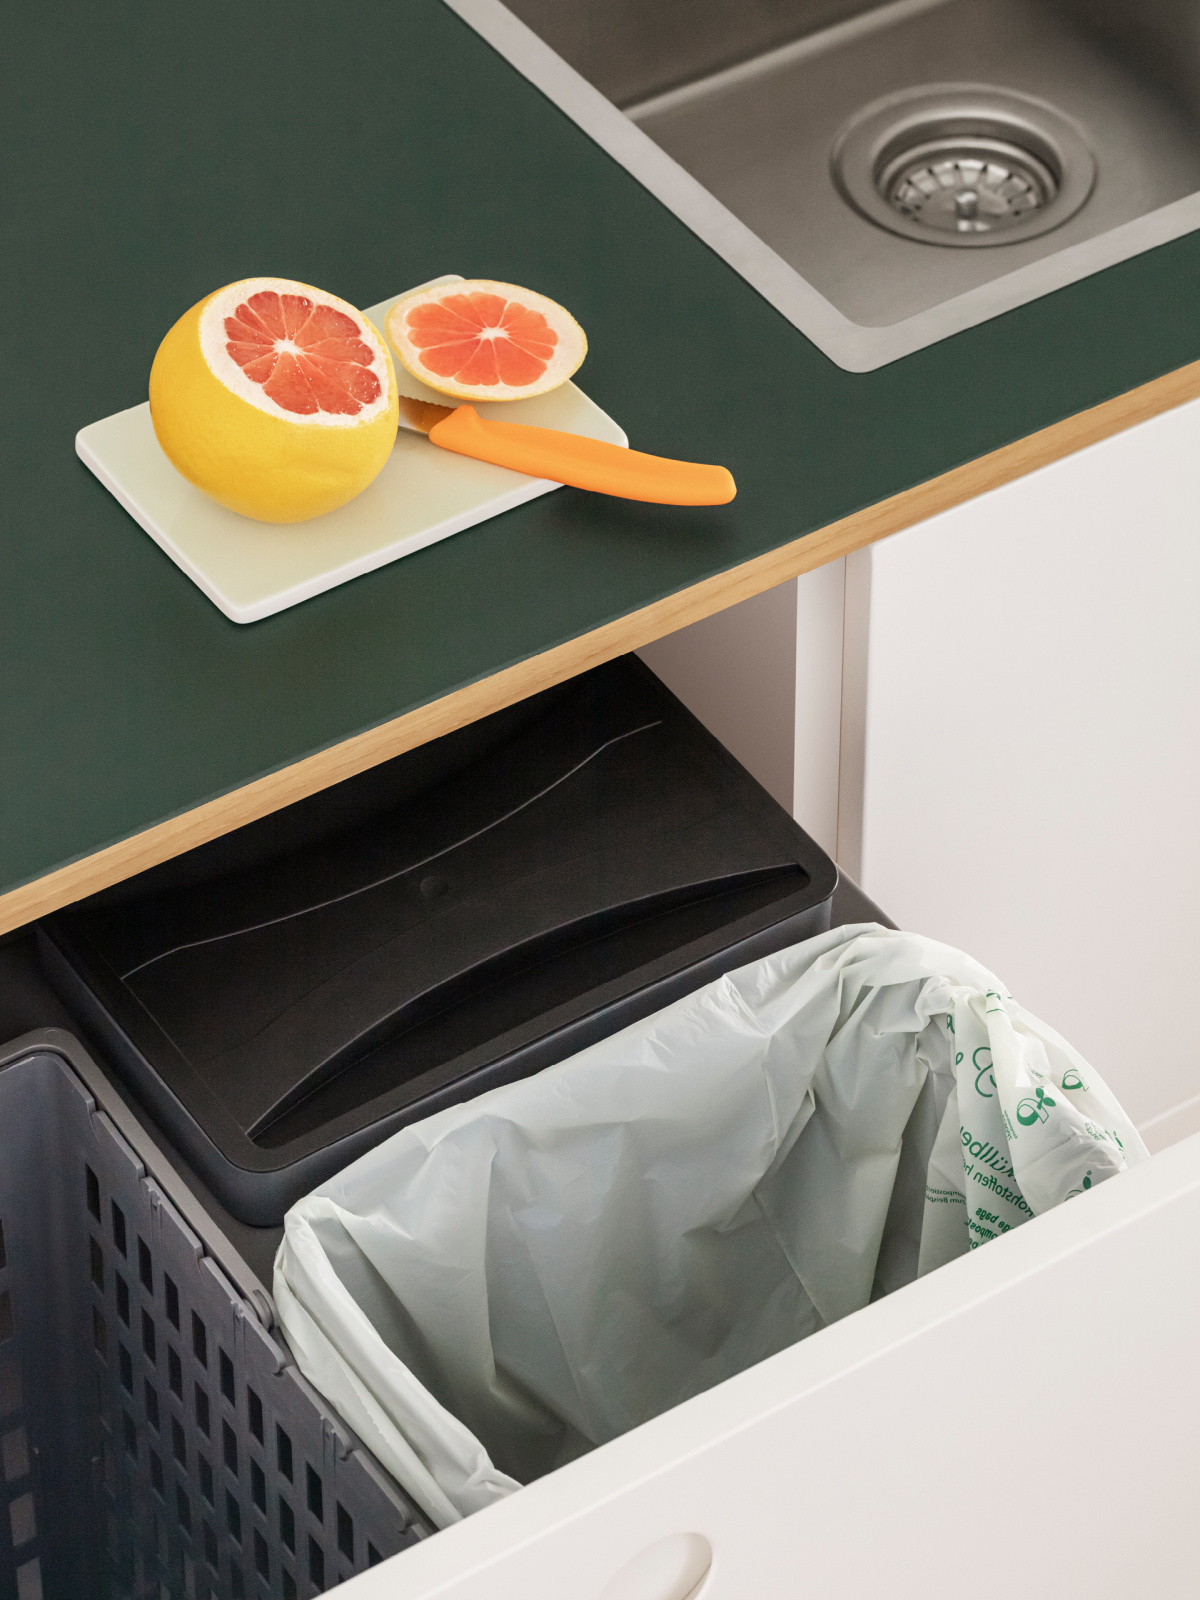 Ideas for sorting waste in your kitchen